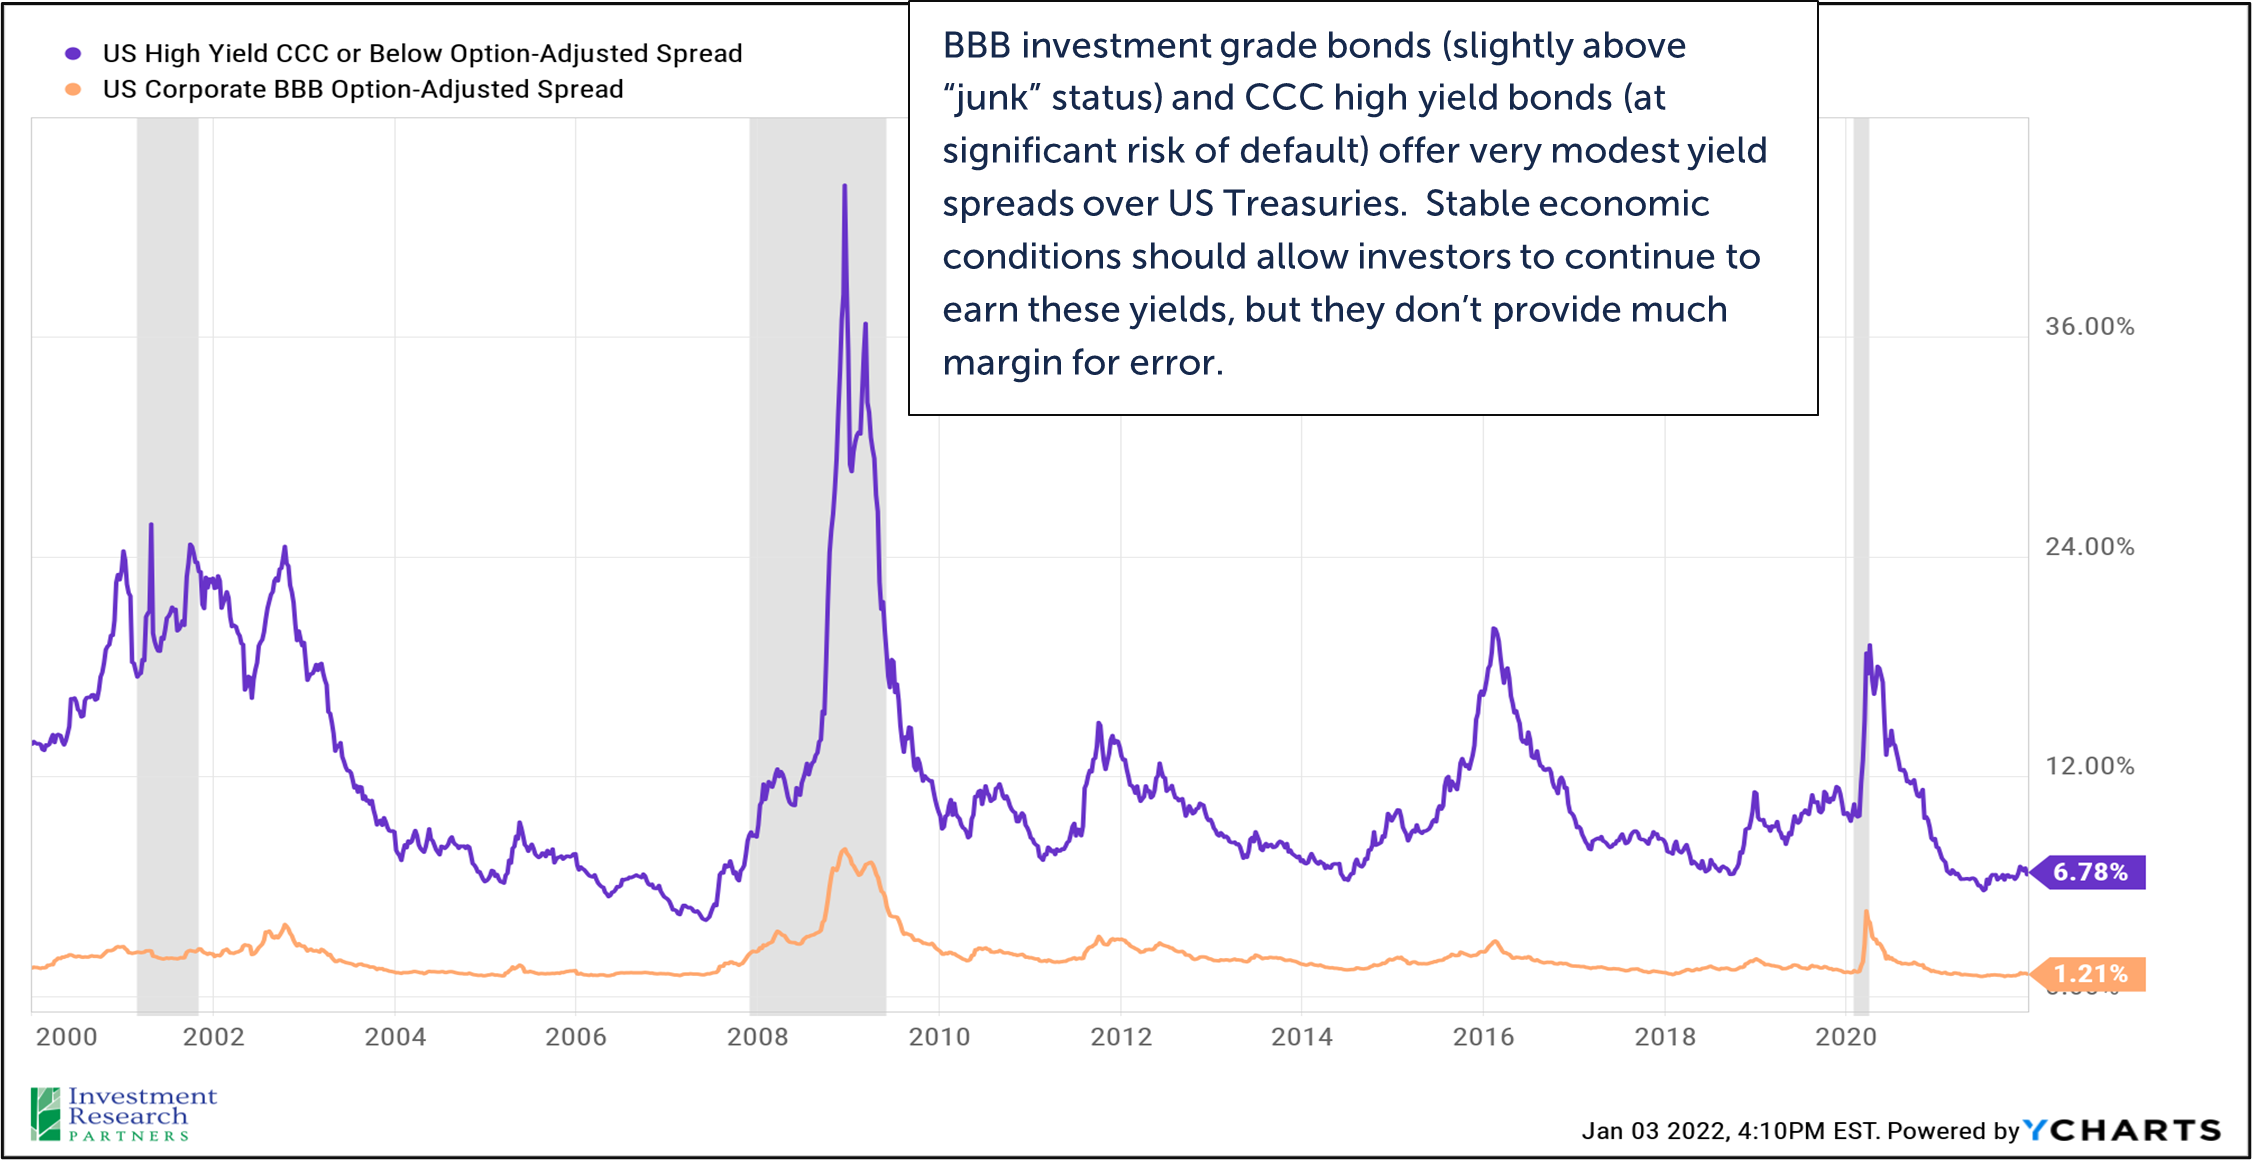 Line graph depicting US High Yield CCC or Below Optoin-Adjusted Spread and US Corporate BBB Option-Adjusted Spread from 2000 to 2021 with text reading: BBB investment grade bonds (slightly above “junk” status) and CCC high yield bonds (at significant risk of default) offer very modest yield spreads over US Treasuries. Stable economic conditions should allow investors to continue to earn these yields, but they don’t provide much margin for error.